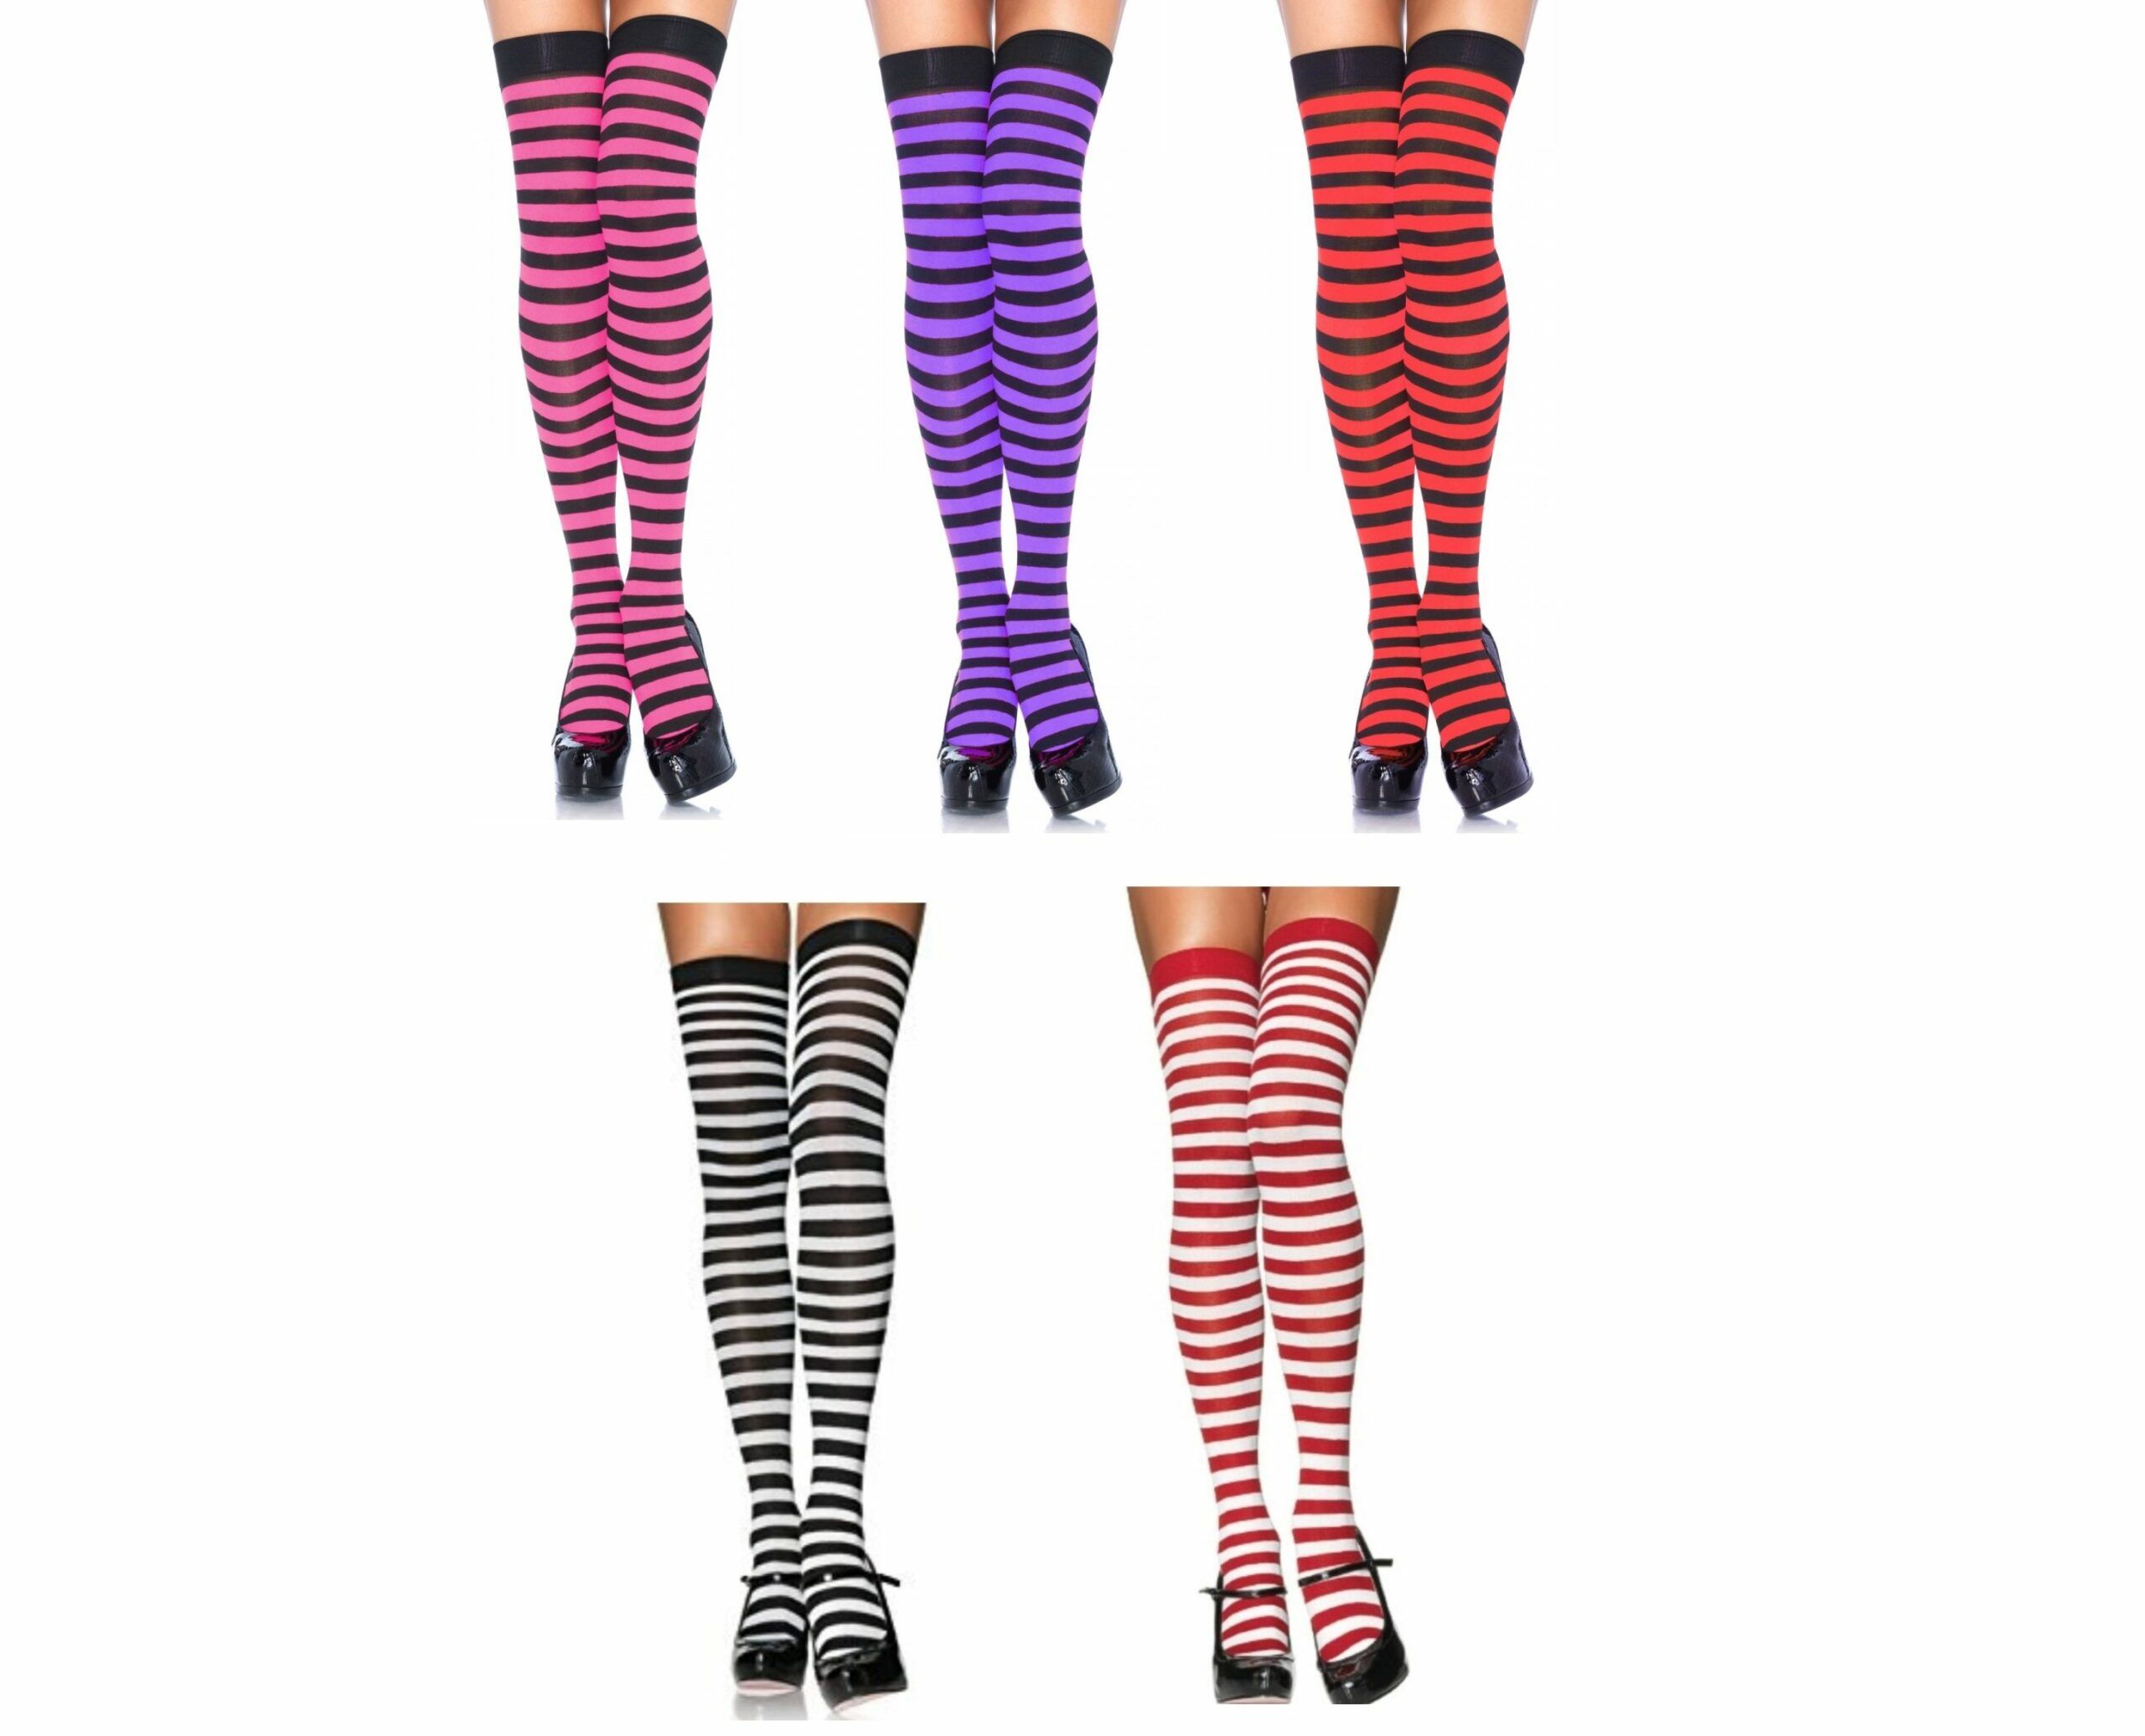 Colourful Neon Striped Thigh High Stockings